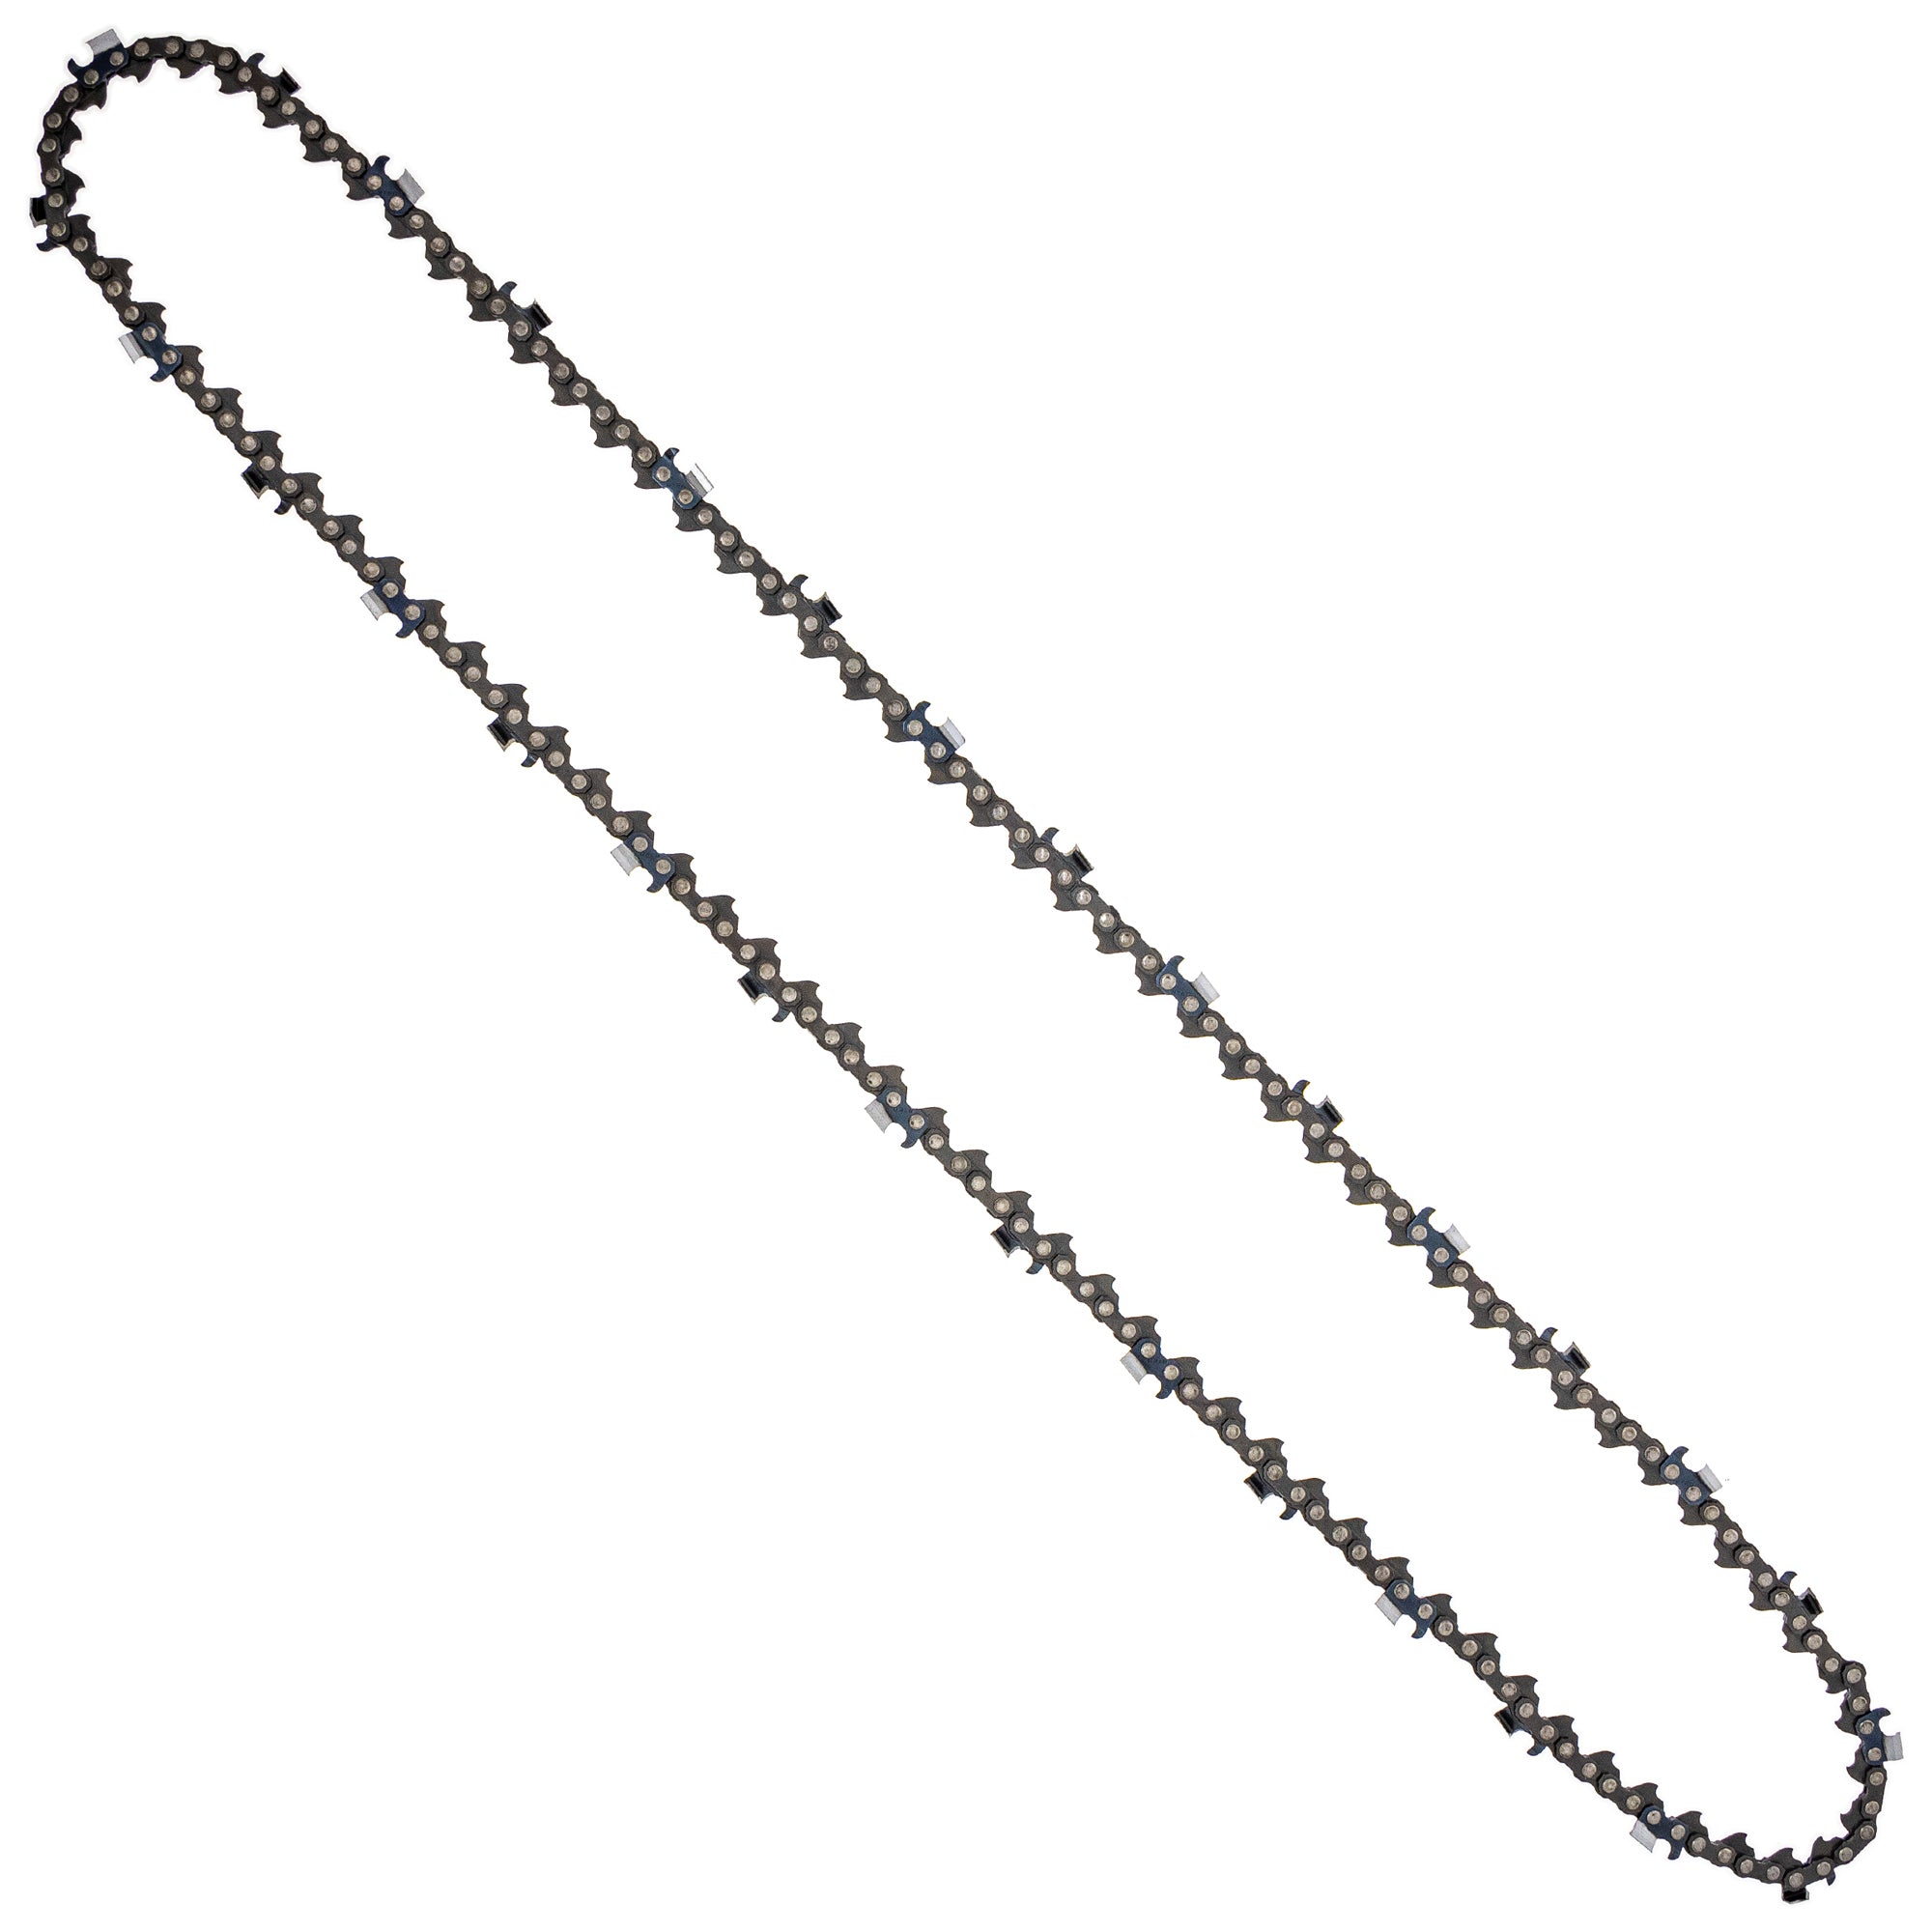 8TEN 810-CCC2207H Chain 4-Pack for zOTHER Oregon MS 066 064 056